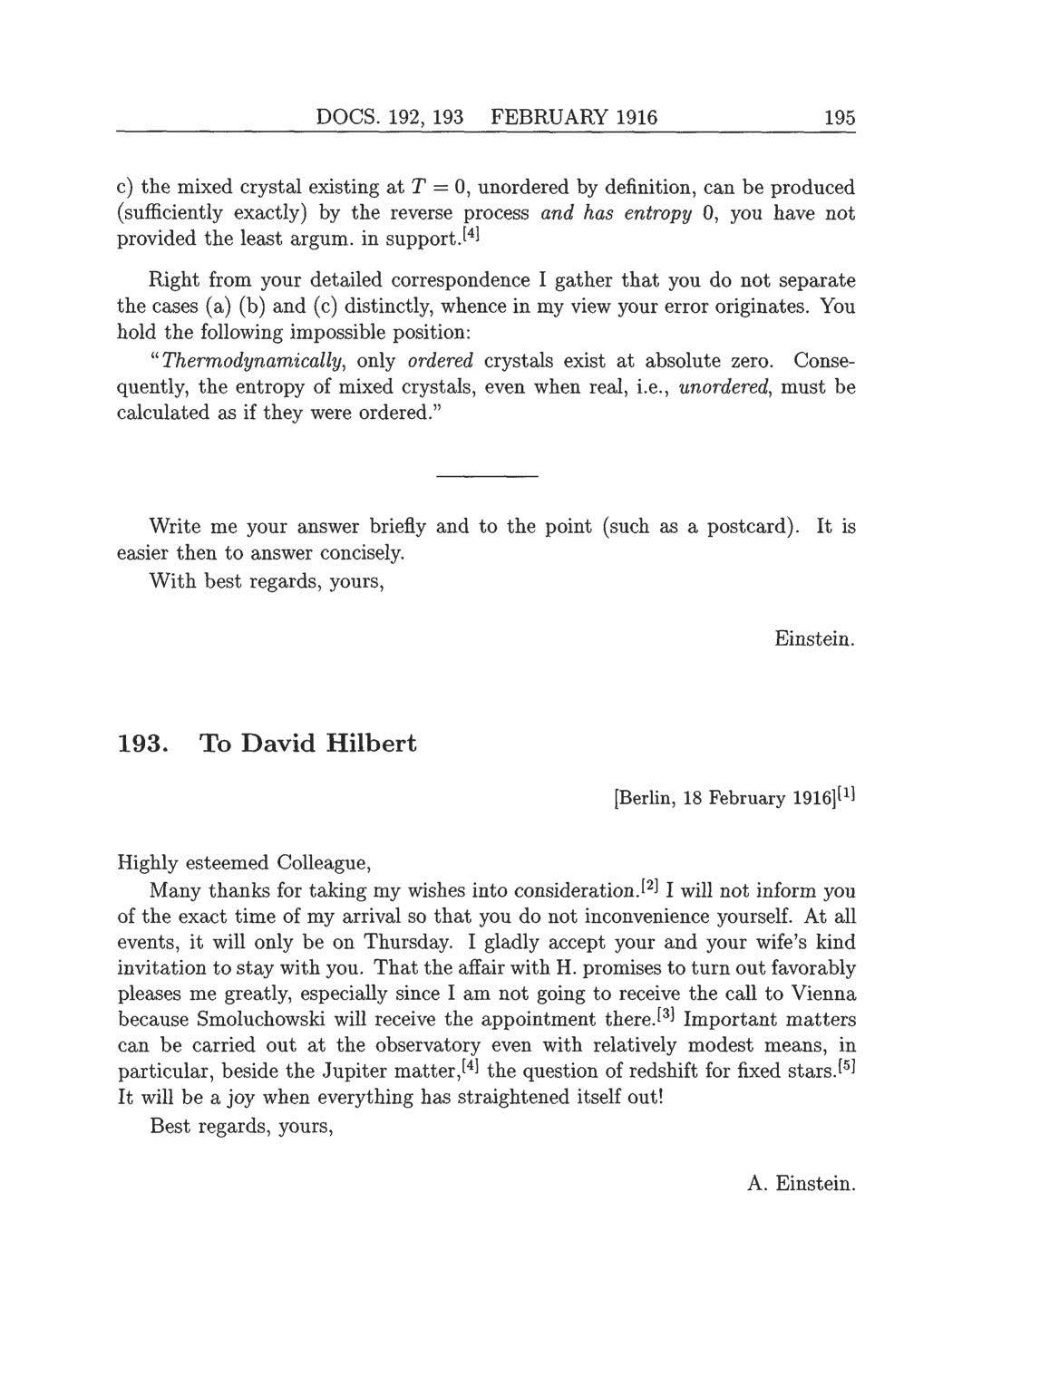 Volume 8: The Berlin Years: Correspondence, 1914-1918 (English translation supplement) page 195